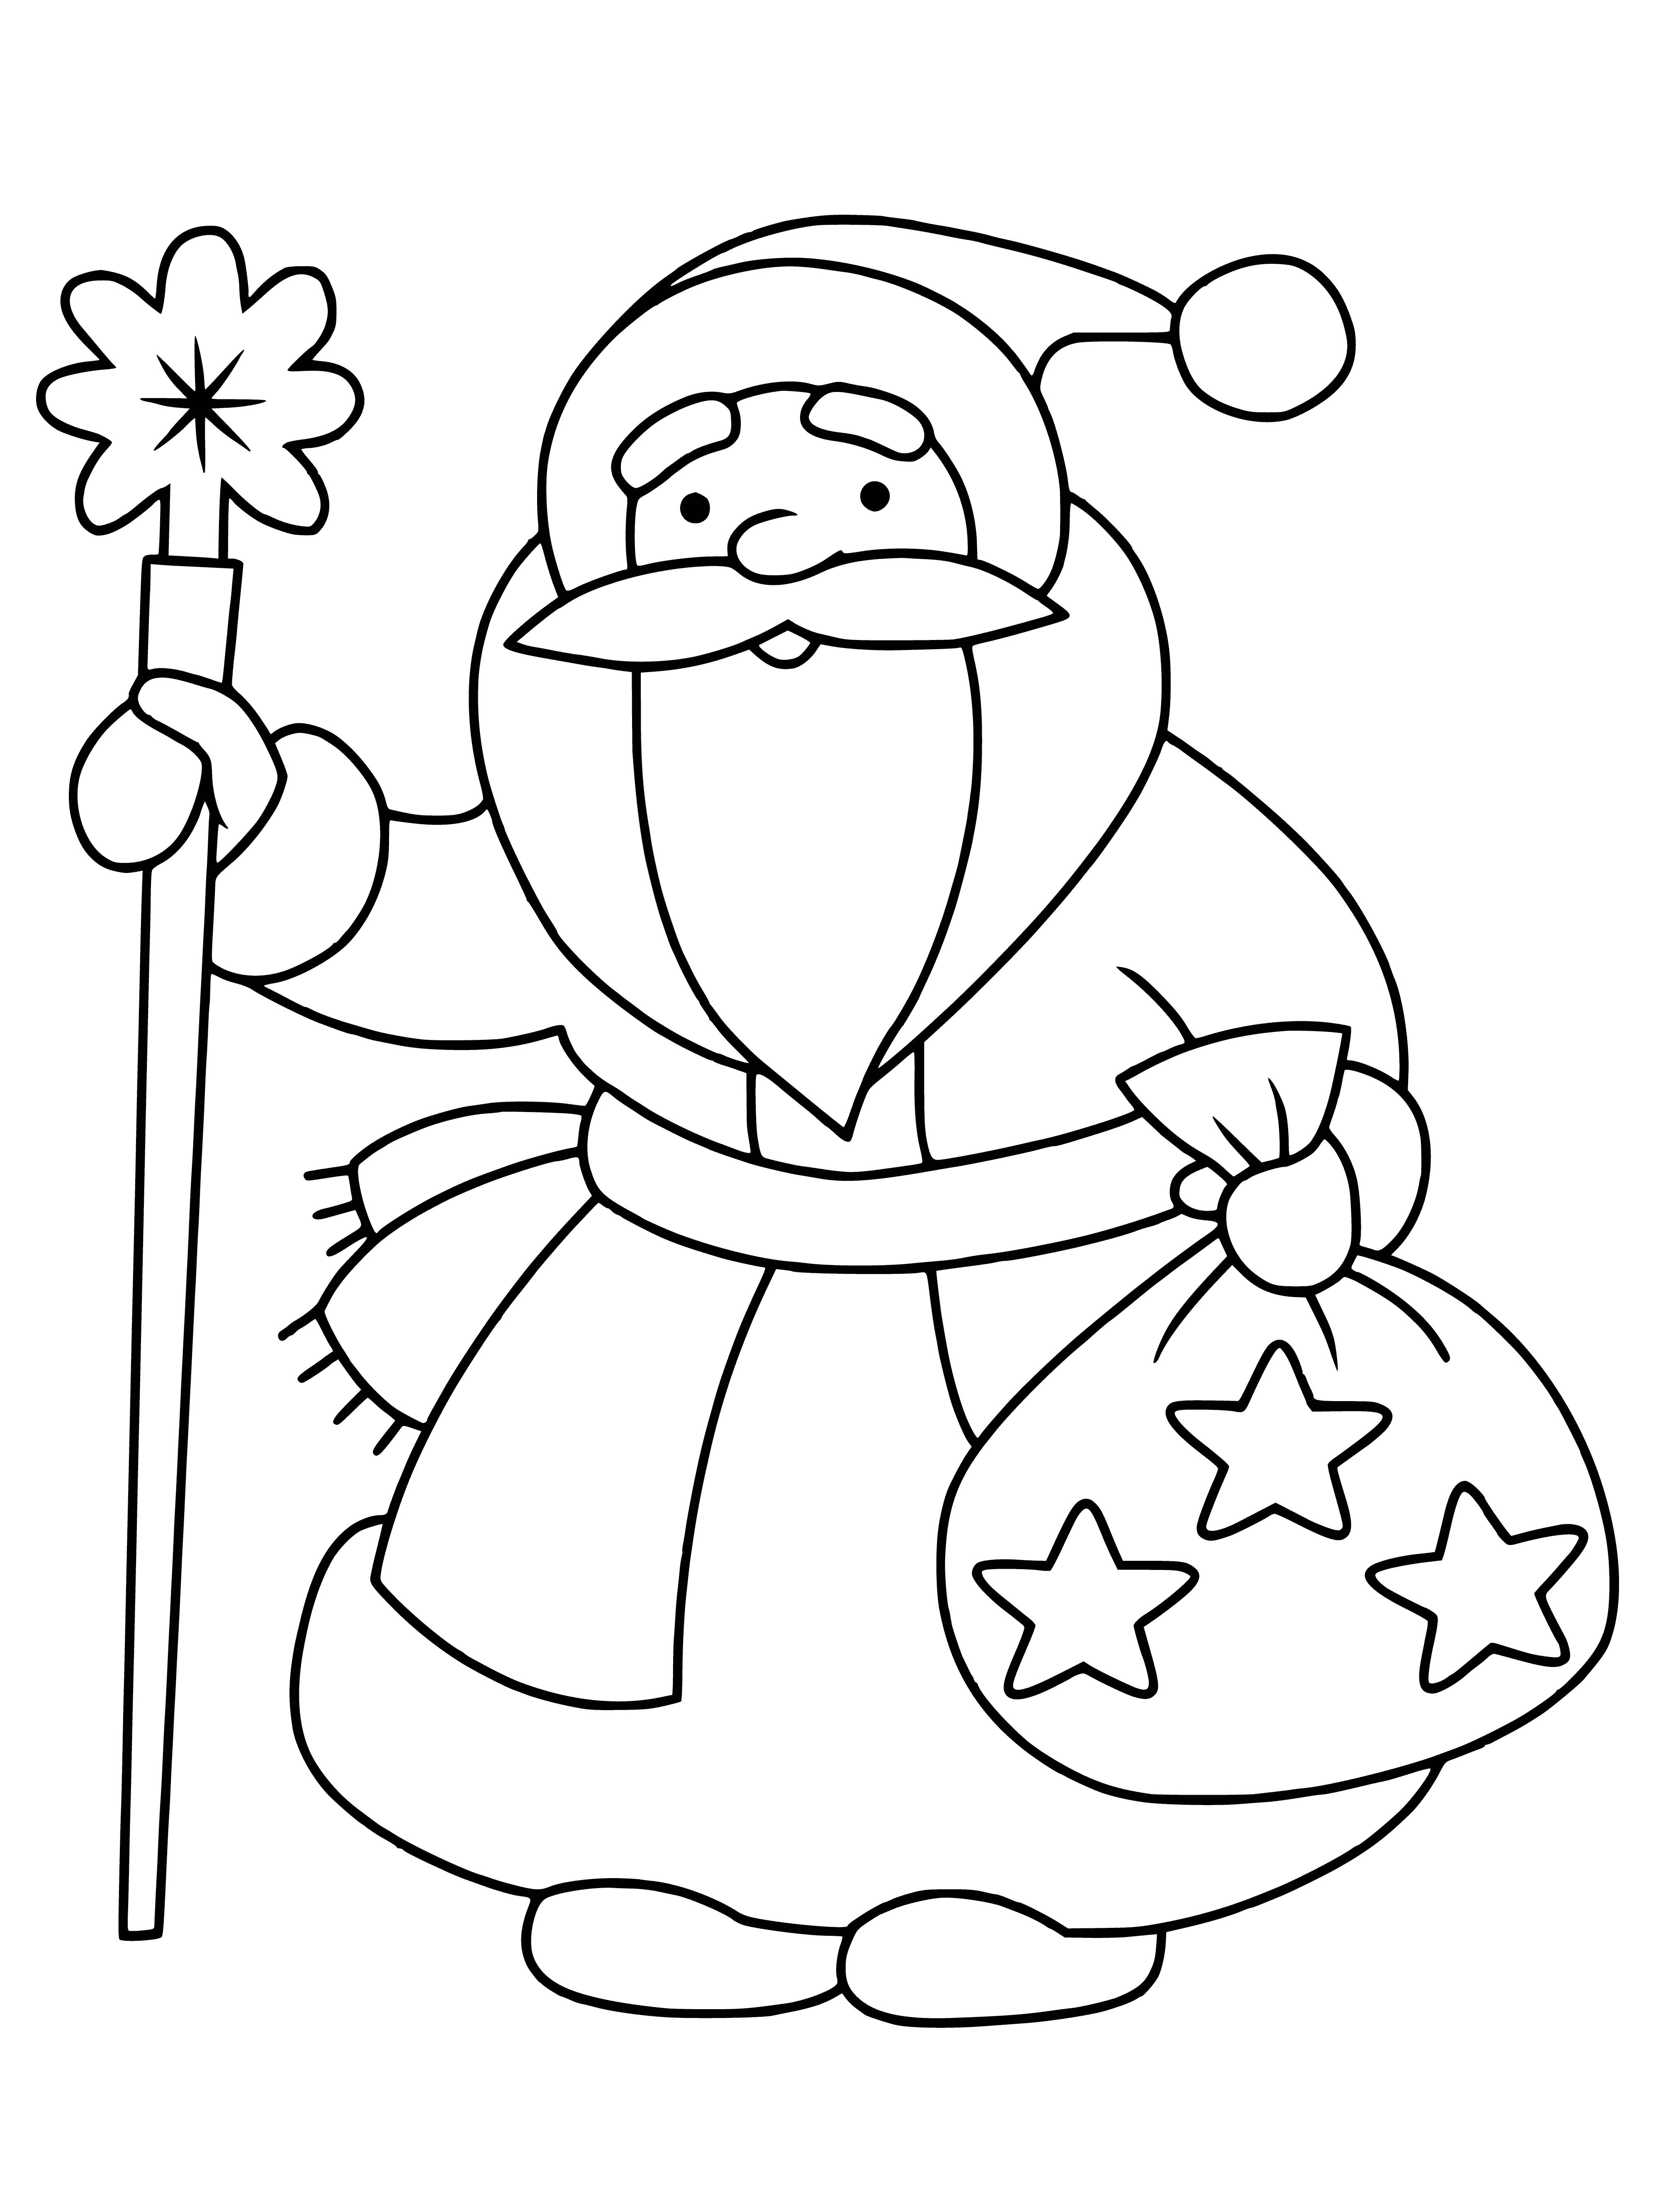 coloring page: Santa sits, with a small boy on his lap, surrounded by toys, cookies, and milk.